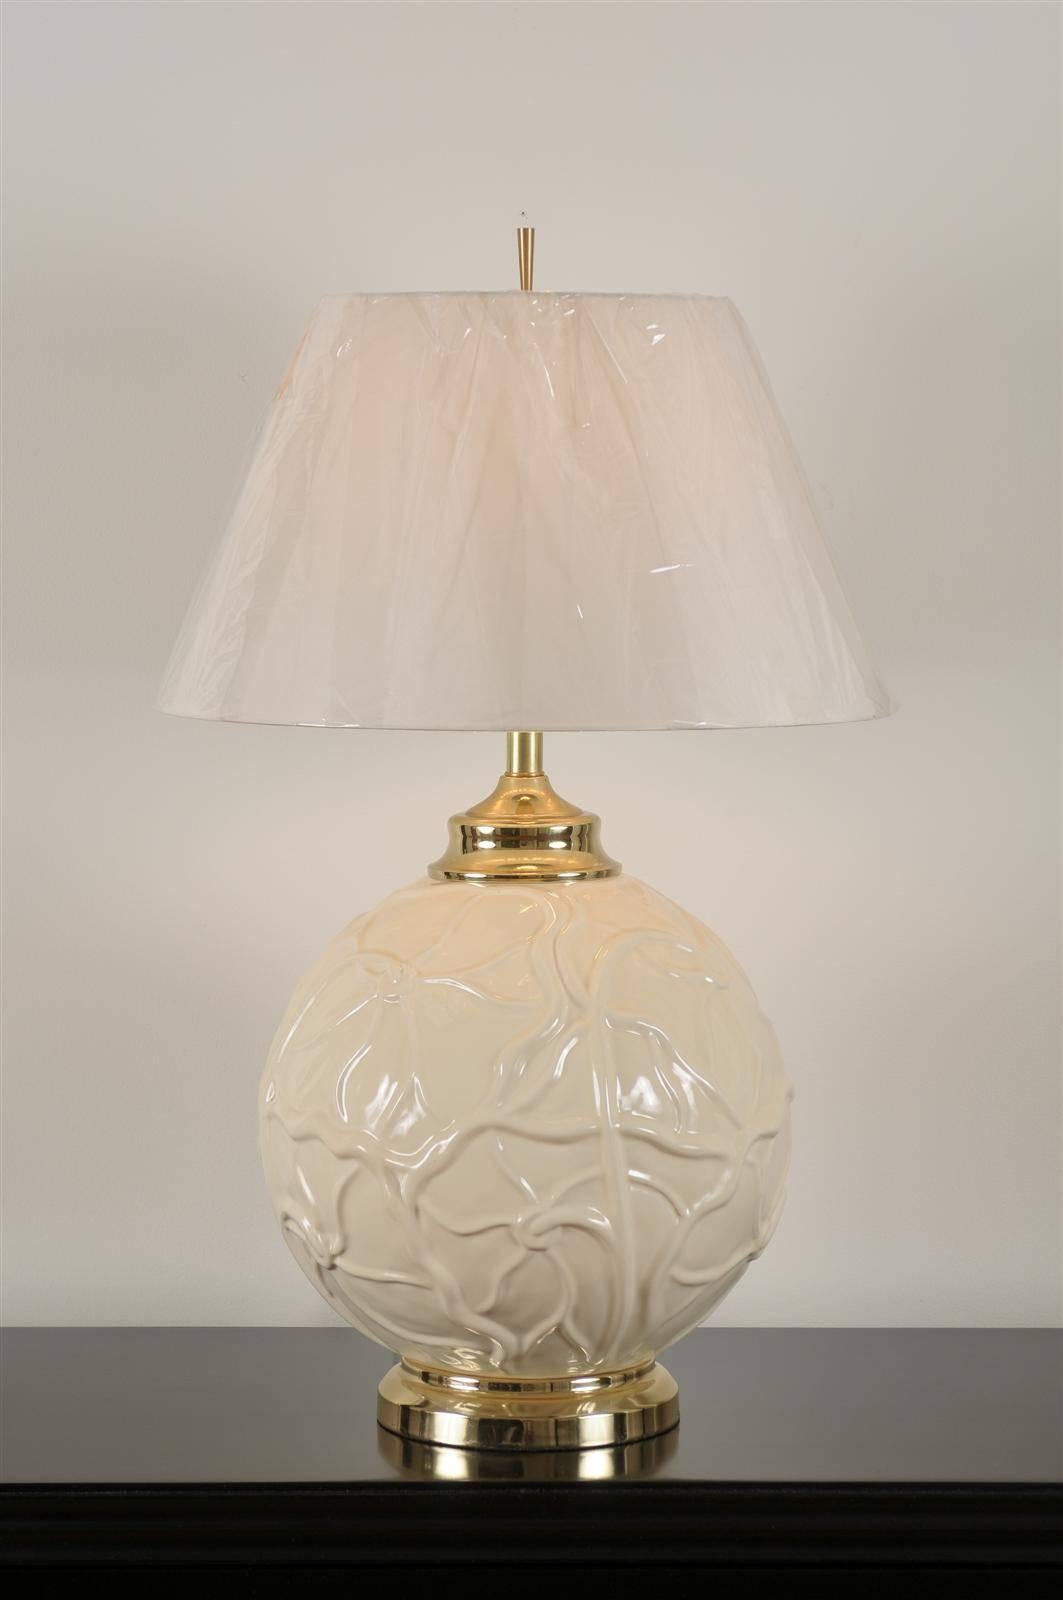 A stellar pair of large-scale vintage ceramic lamps, circa 1970. Fabulous lily pad motif with lovely brass accents. Dramatic jewelry ! Excellent restored condition. Rewired using clear cord; new brass three-way sockets with brass turn switch. The